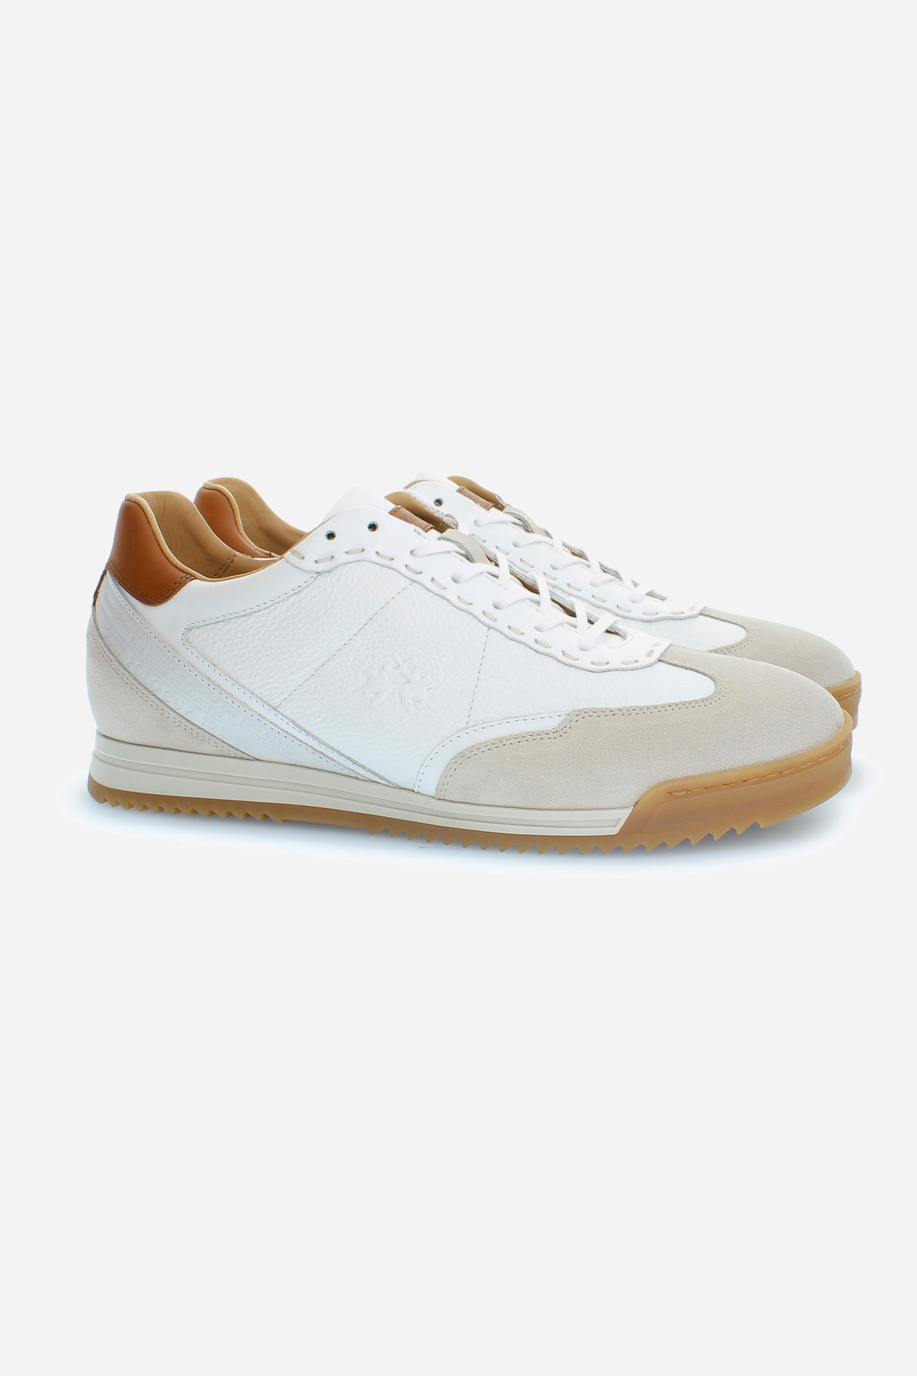 Classic men's trainers in leather - Man shoes | La Martina - Official Online Shop